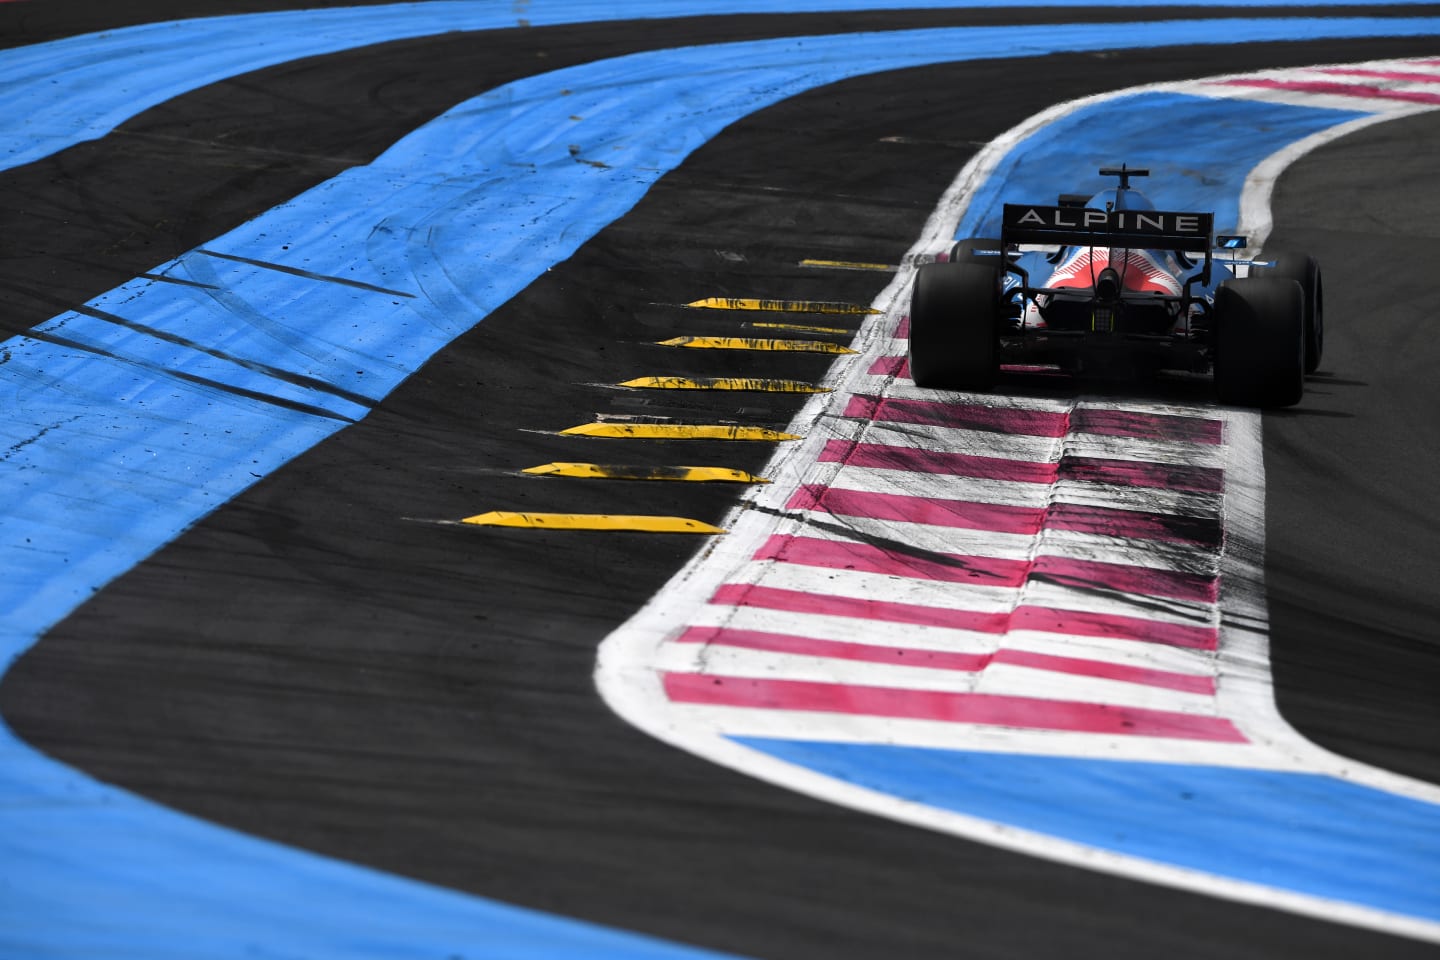 LE CASTELLET, FRANCE - JUNE 18: Fernando Alonso of Spain driving the (14) Alpine A521 Renault on track during practice ahead of the F1 Grand Prix of France at Circuit Paul Ricard on June 18, 2021 in Le Castellet, France. (Photo by Rudy Carezzevoli/Getty Images)